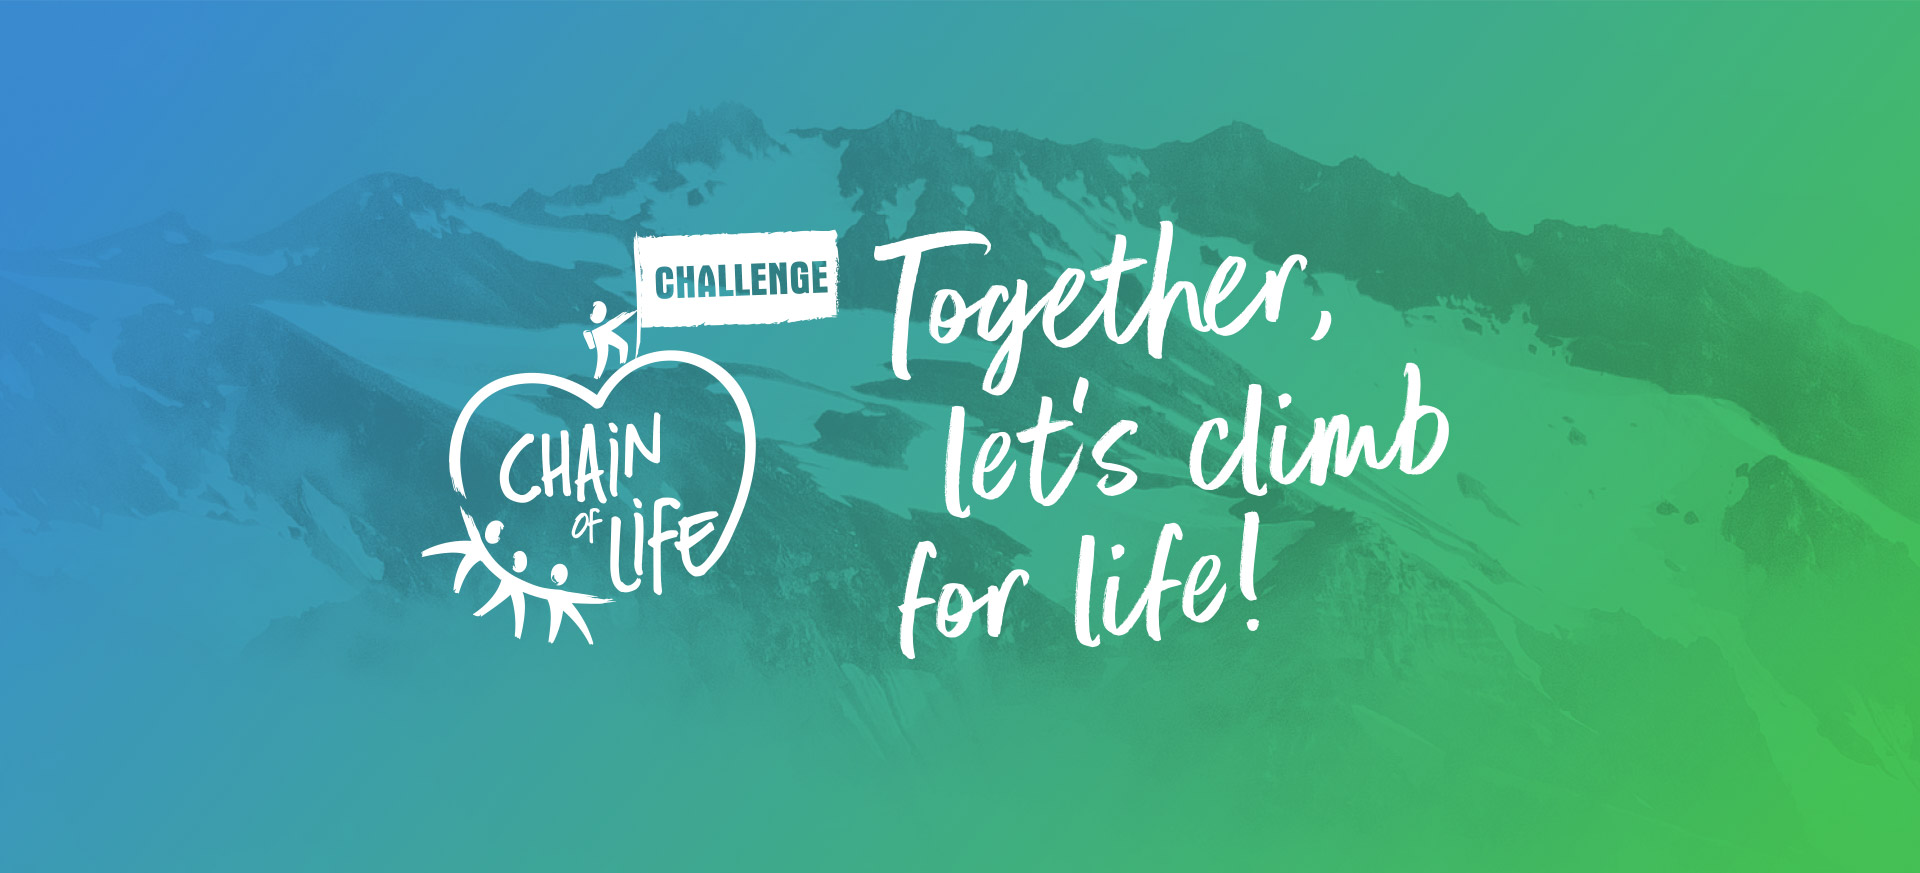 Welcome to the 2021 edition of the Chain of Life Challenge!